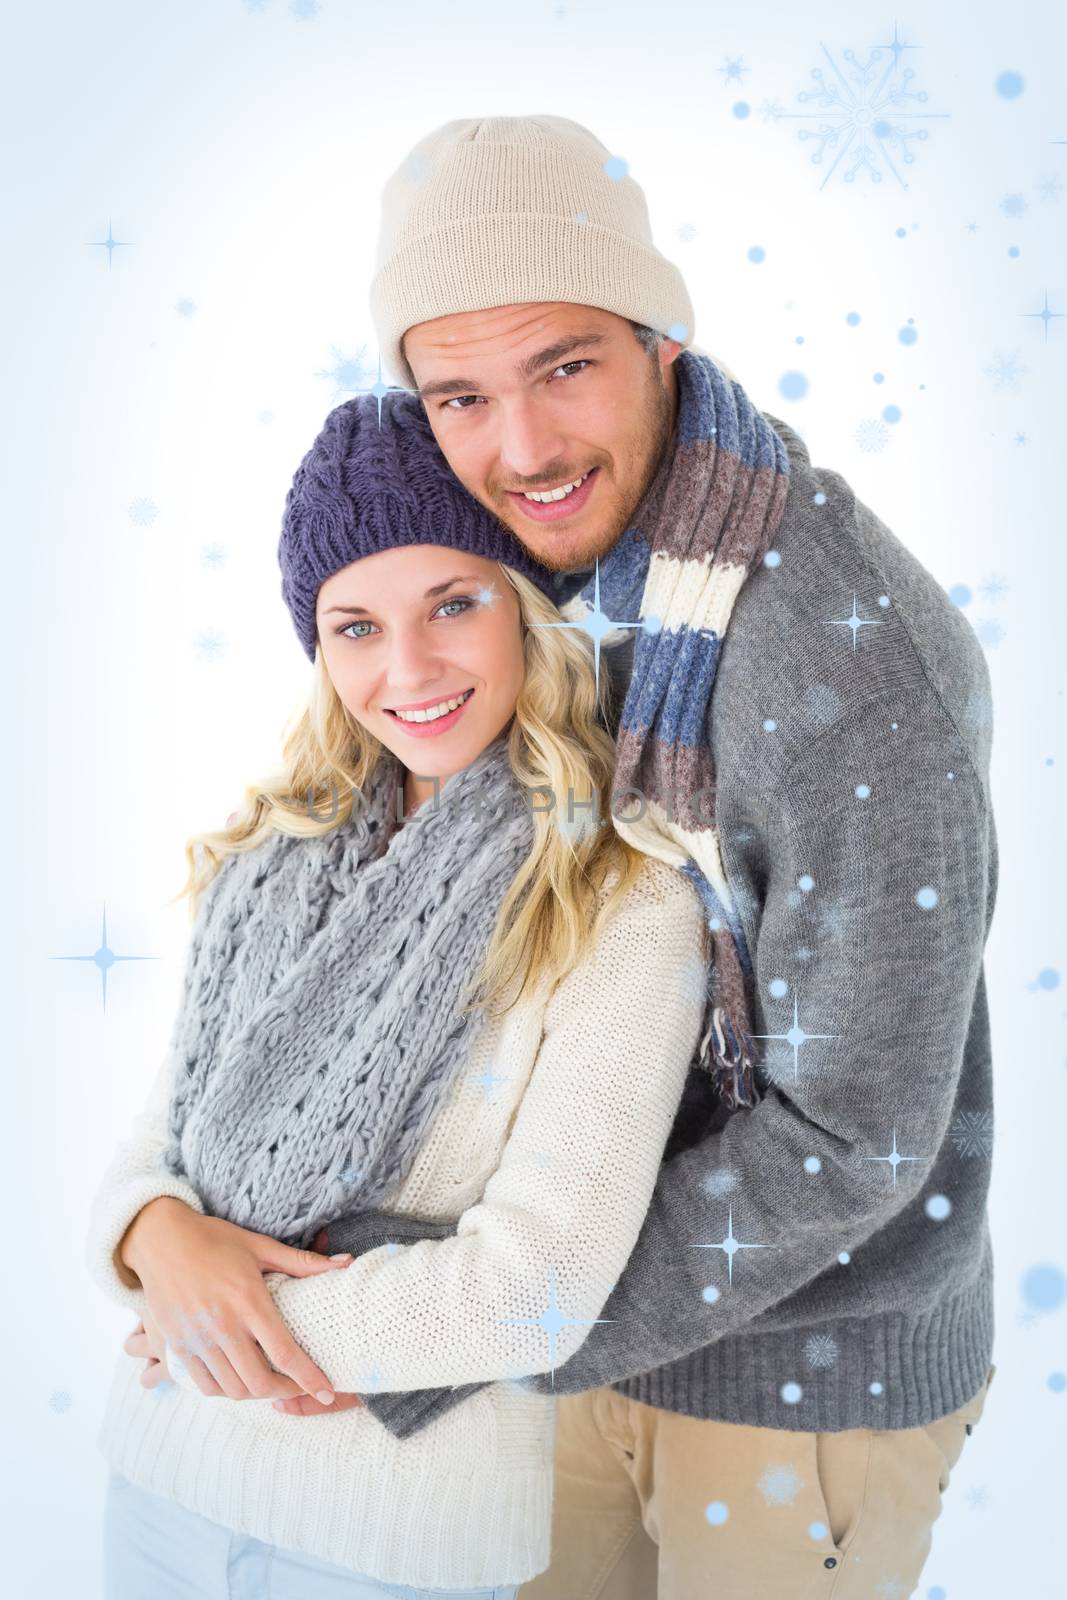 Attractive couple in winter fashion hugging against snow falling